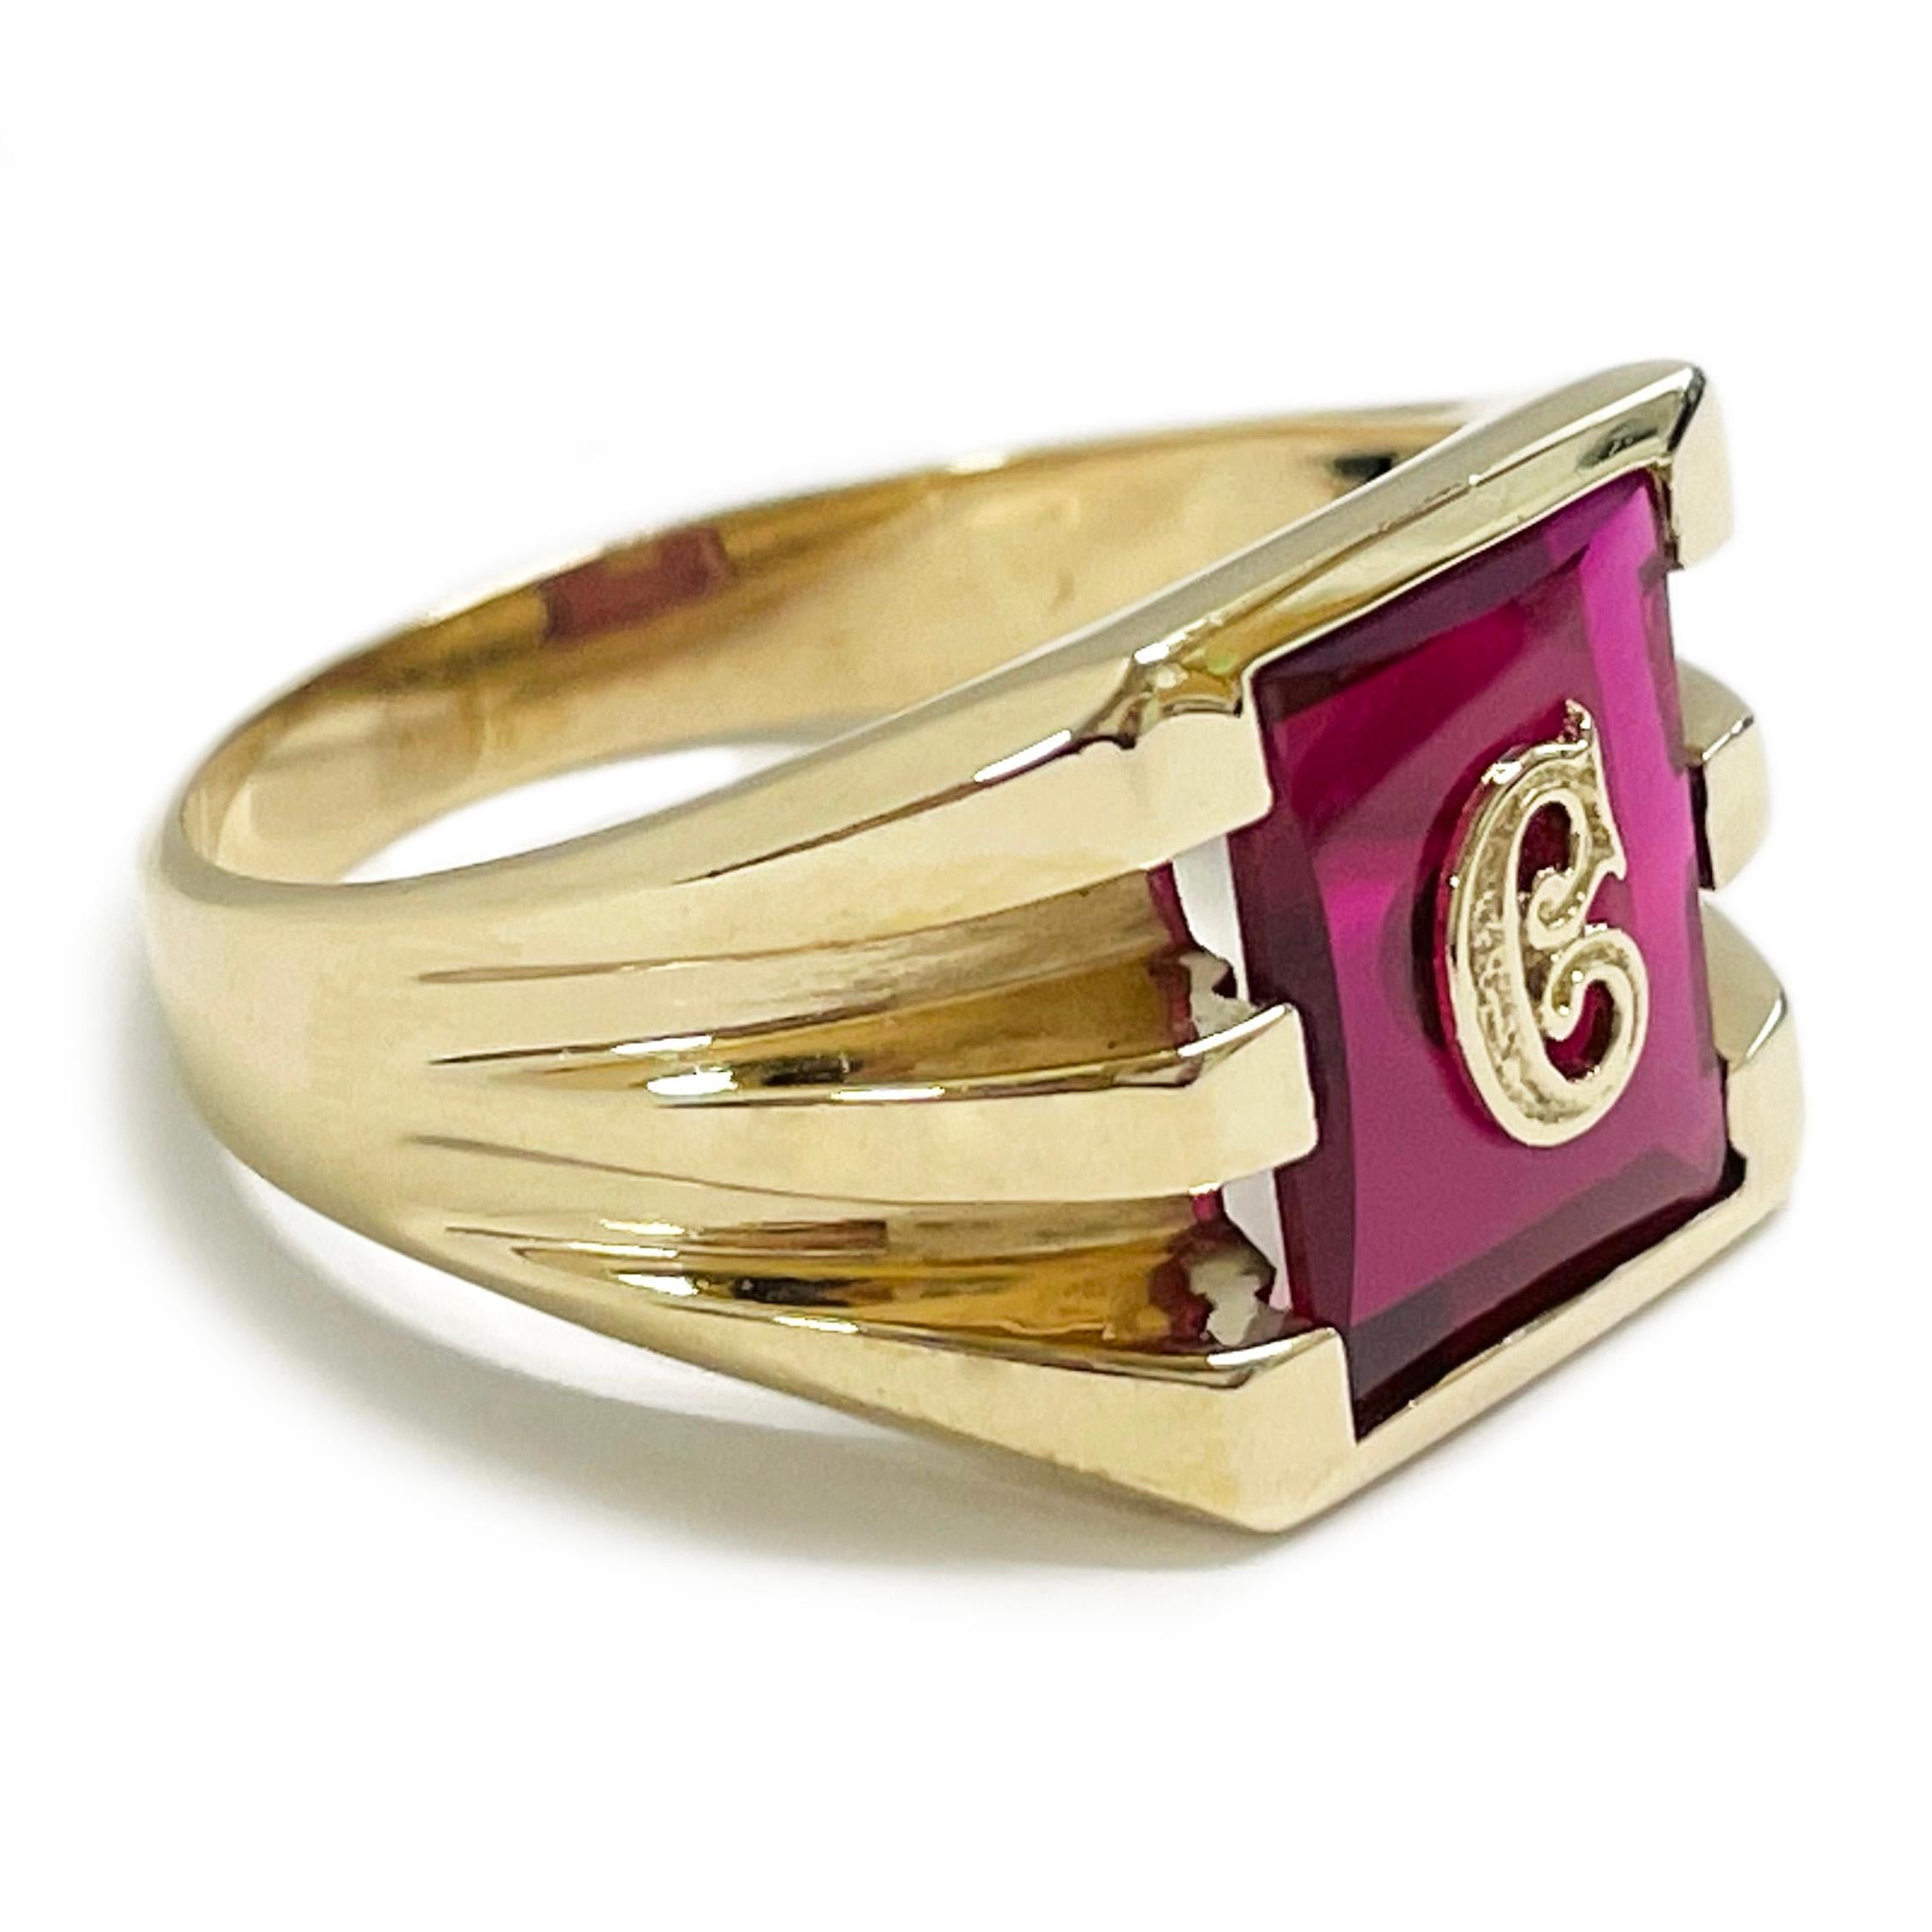 10 Karat Pink Corundum Initial C Ring. At the center of the ring is a 10 x 12mm pink Corundum with a gold ornate initial C set in the stone. There is a small piece of stone missing inside the bottom of the open space of the C (see photos), however